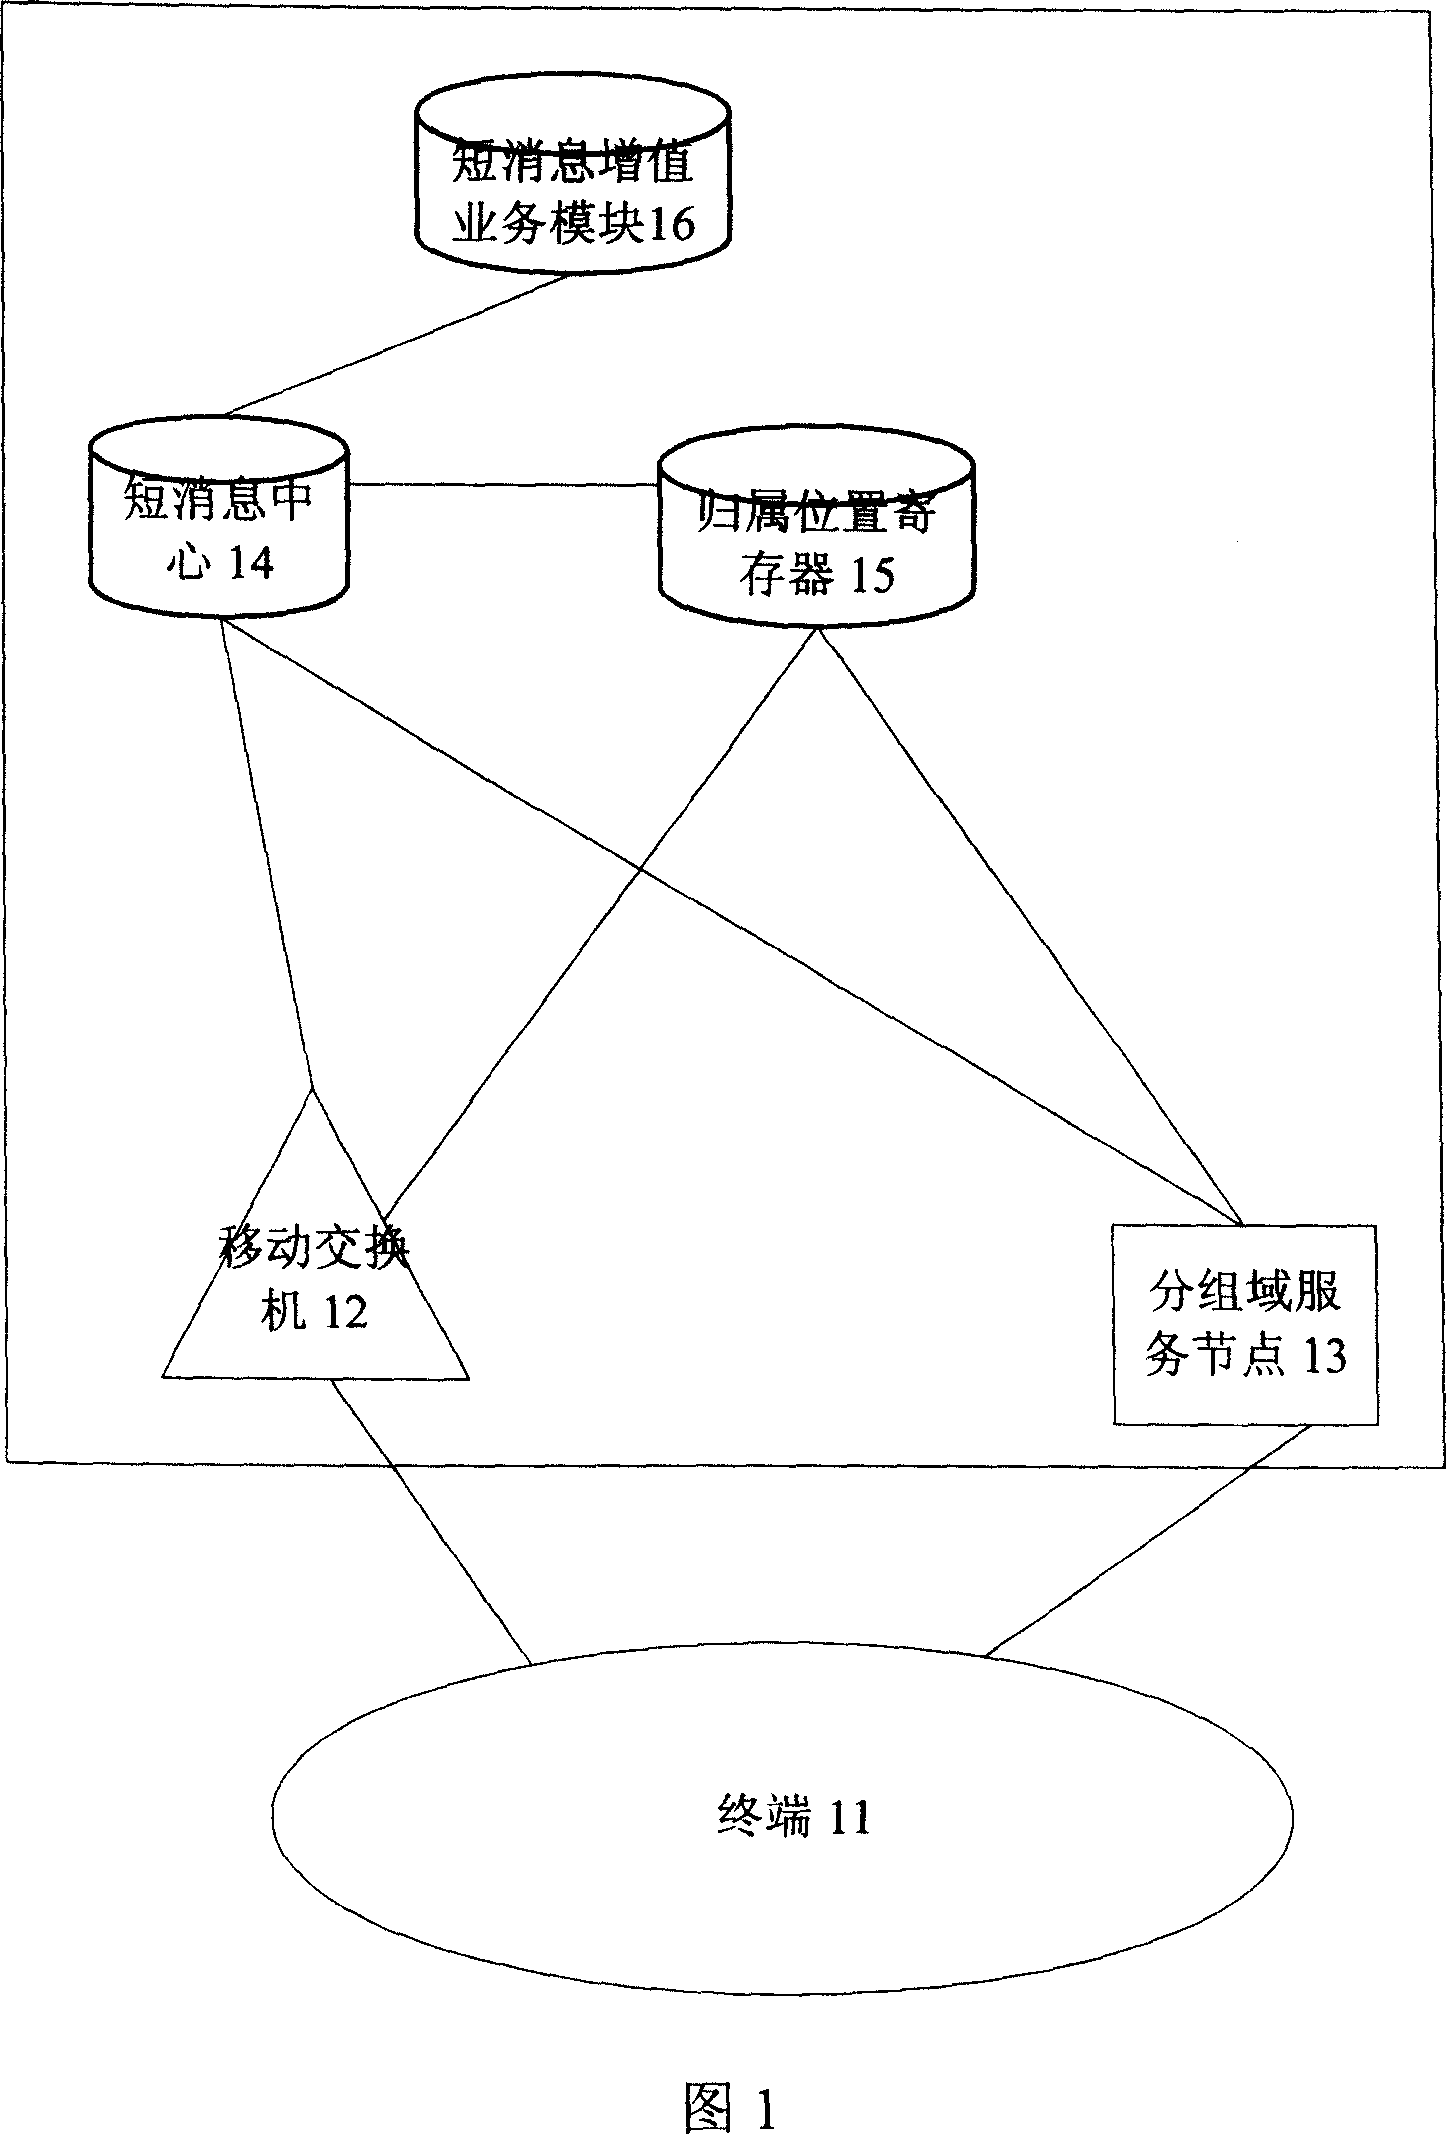 A device and method for realizing automatic SMS forward